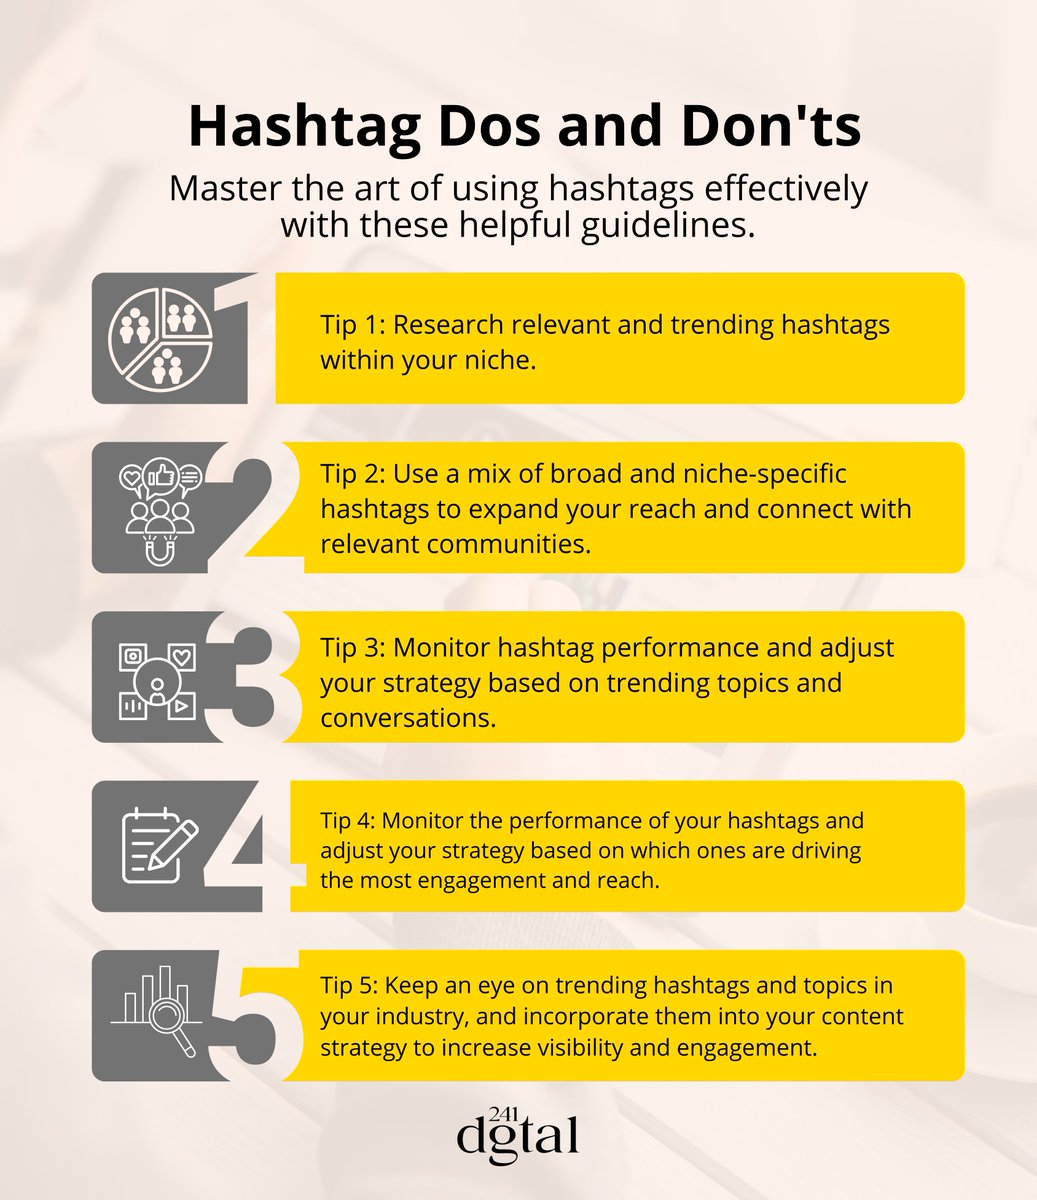 Master the art of hashtags! 🔍 Discover the dos and don'ts of hashtag usage for maximum visibility. #HashtagTips #BoostYourReach #EffectiveHashtags Ready to level up your hashtag game? Check out our hashtag guide now!